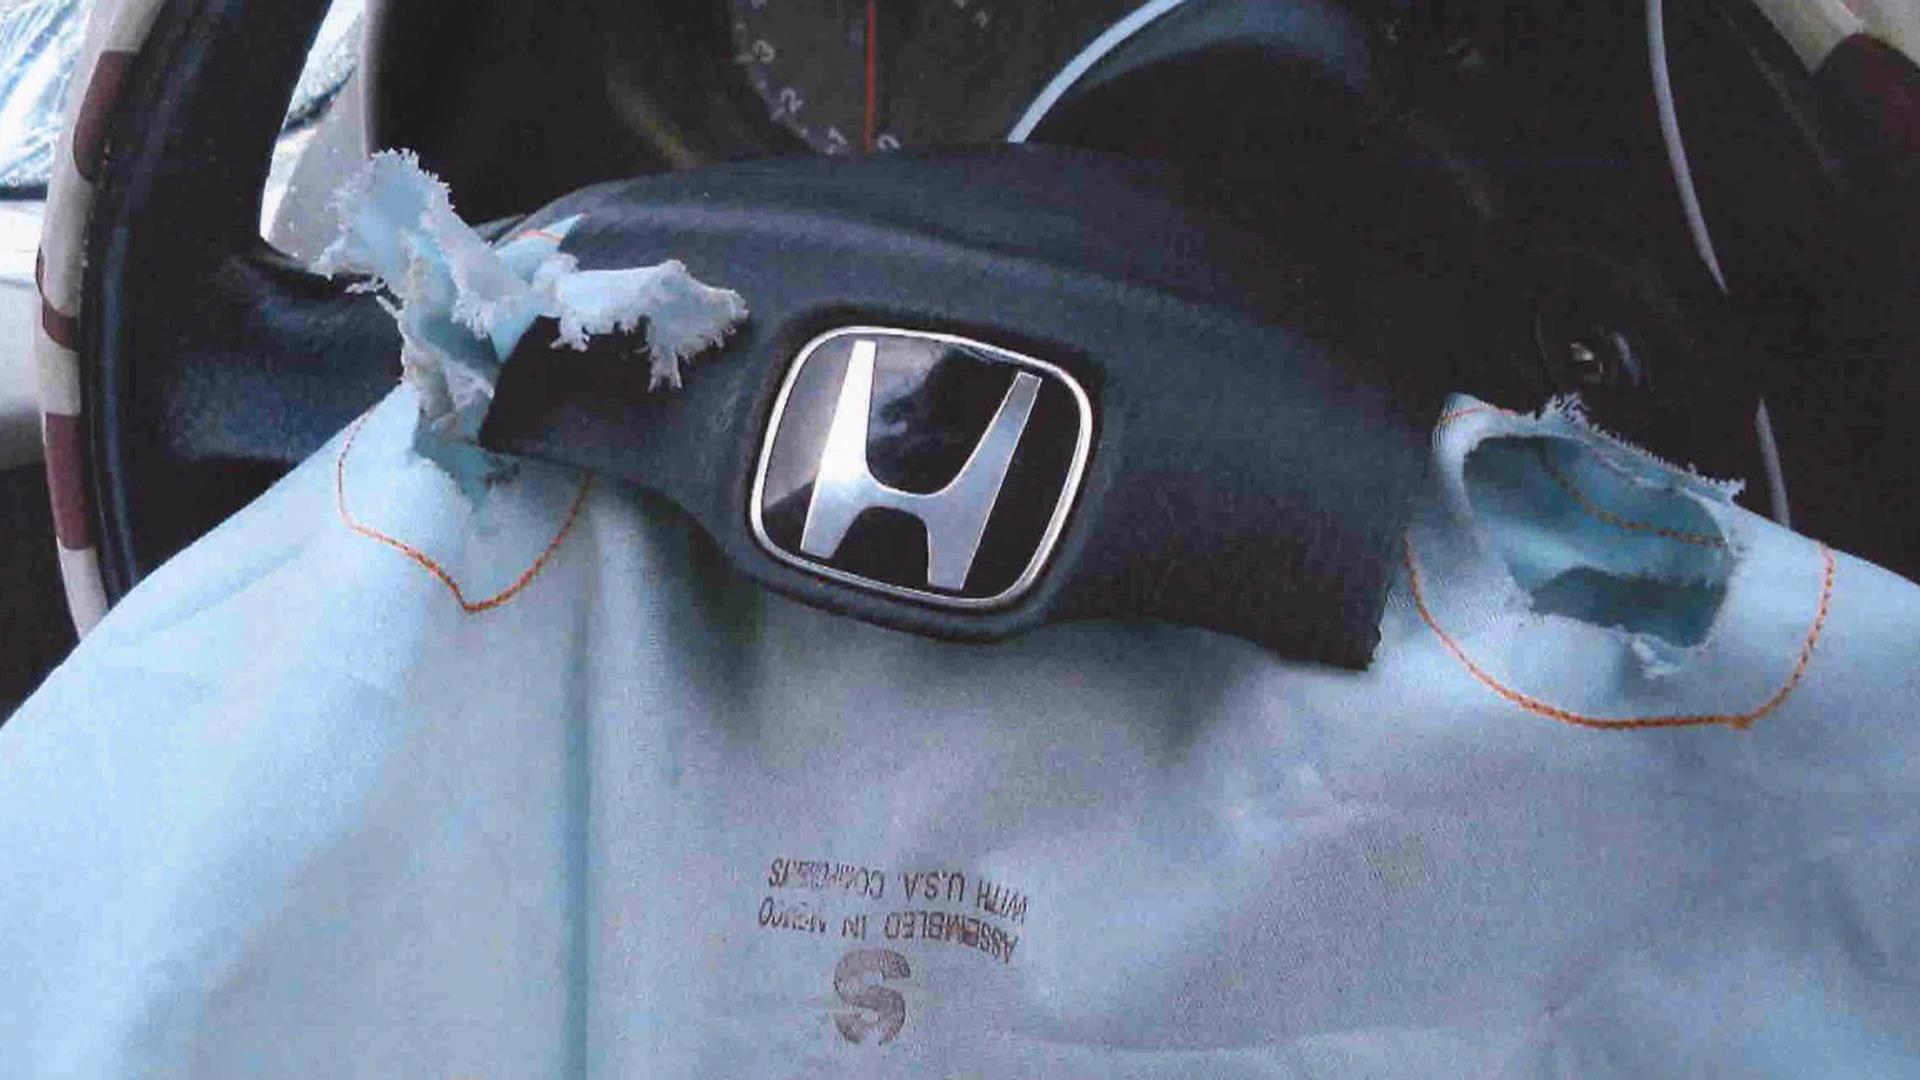 Takata Airbag Recall, Largest in U.S. History, Just Got Even Bigger